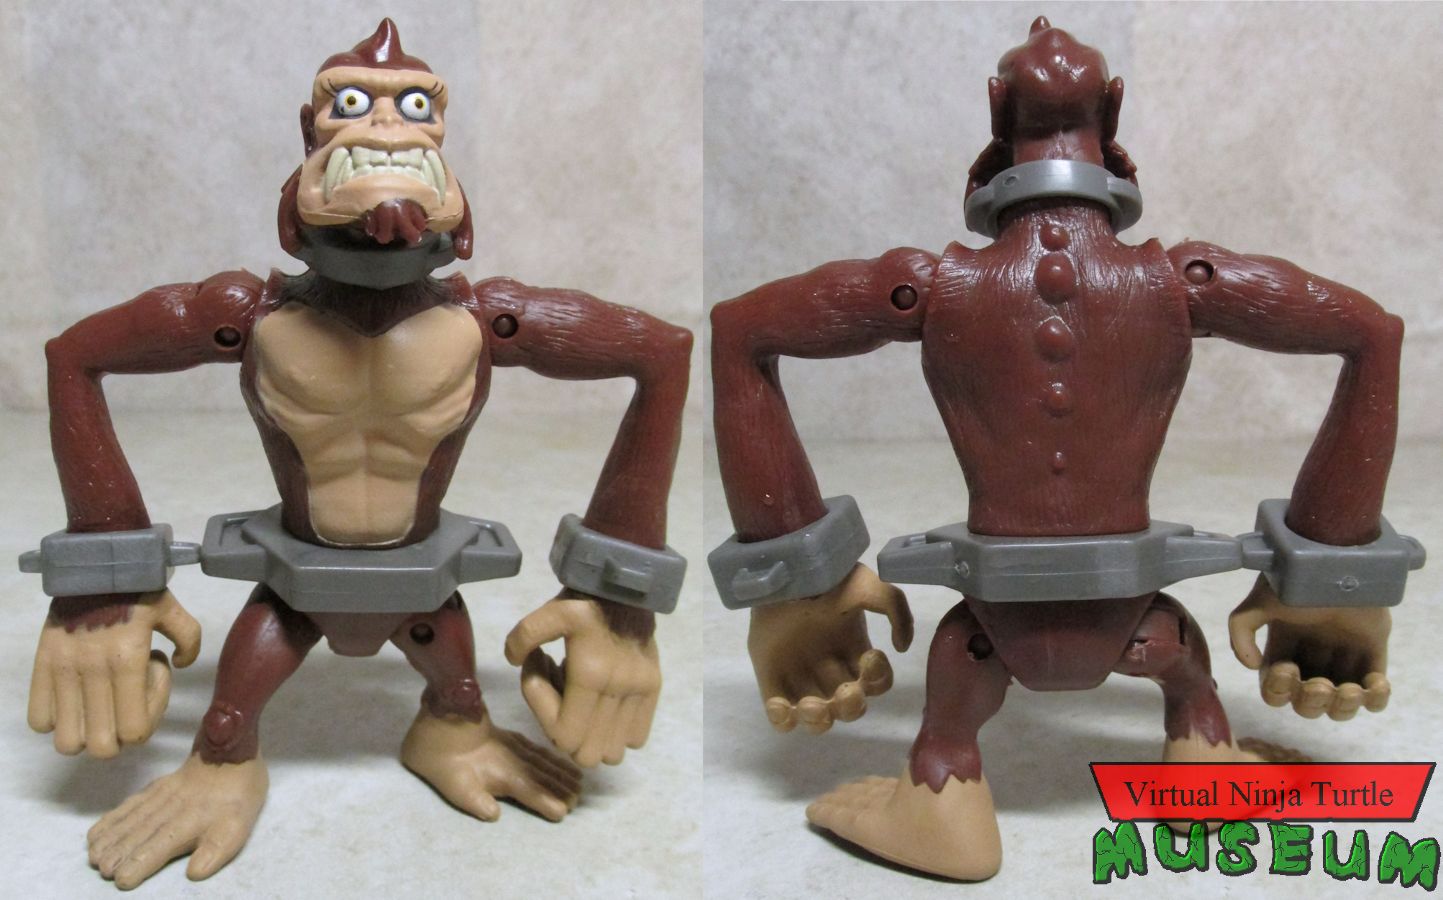  Monkey Brains front and back